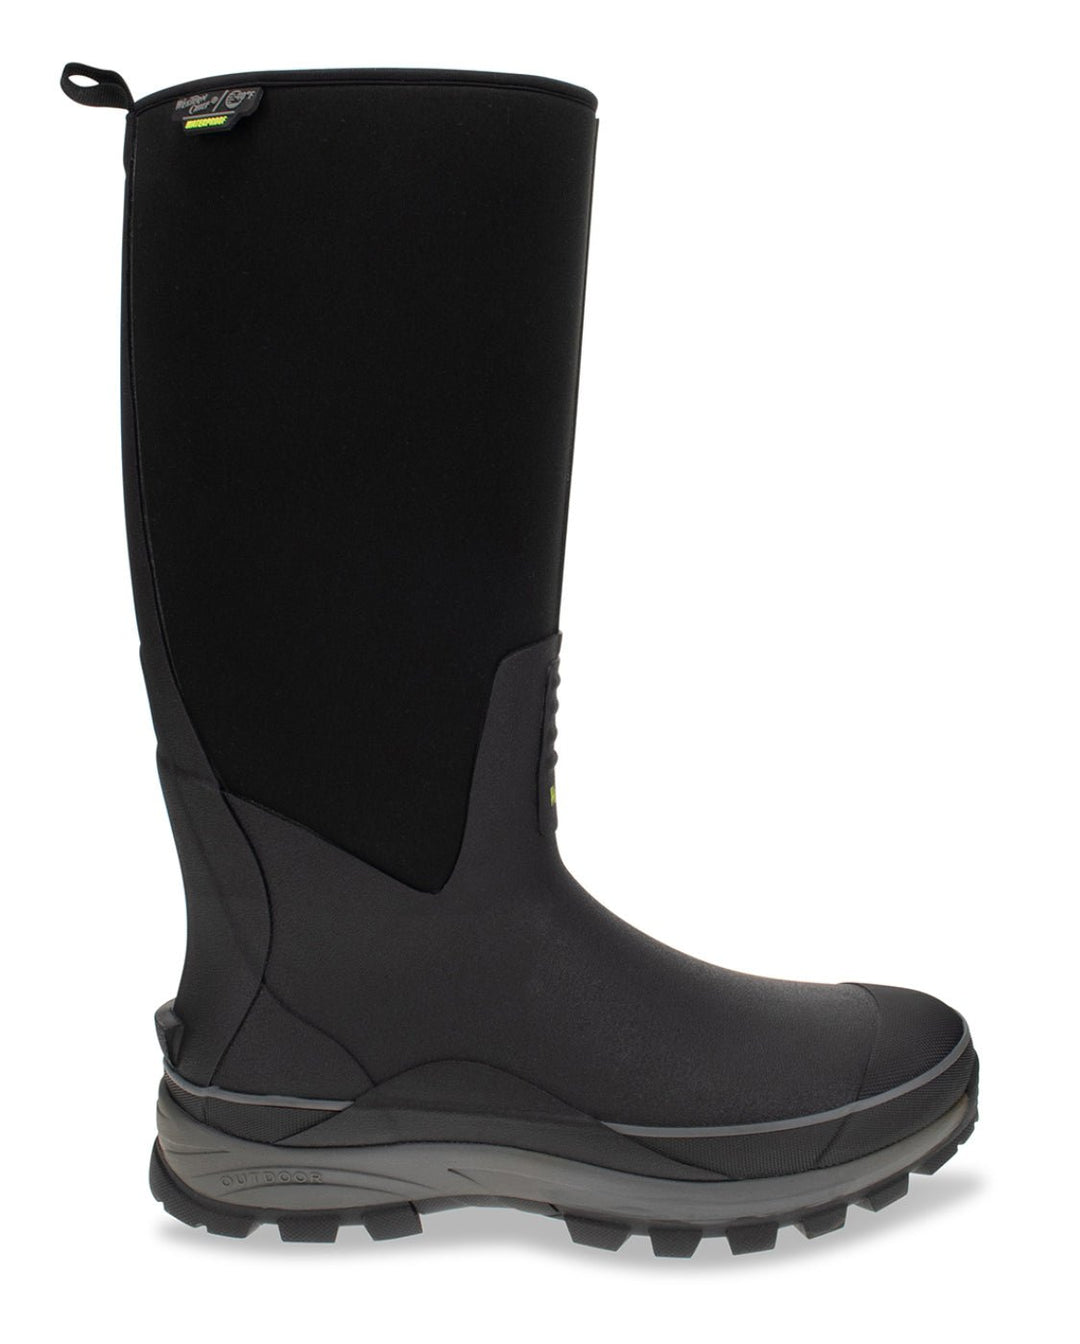 Men's Frontier Tall Neoprene Cold Weather Boot - Black - Western Chief